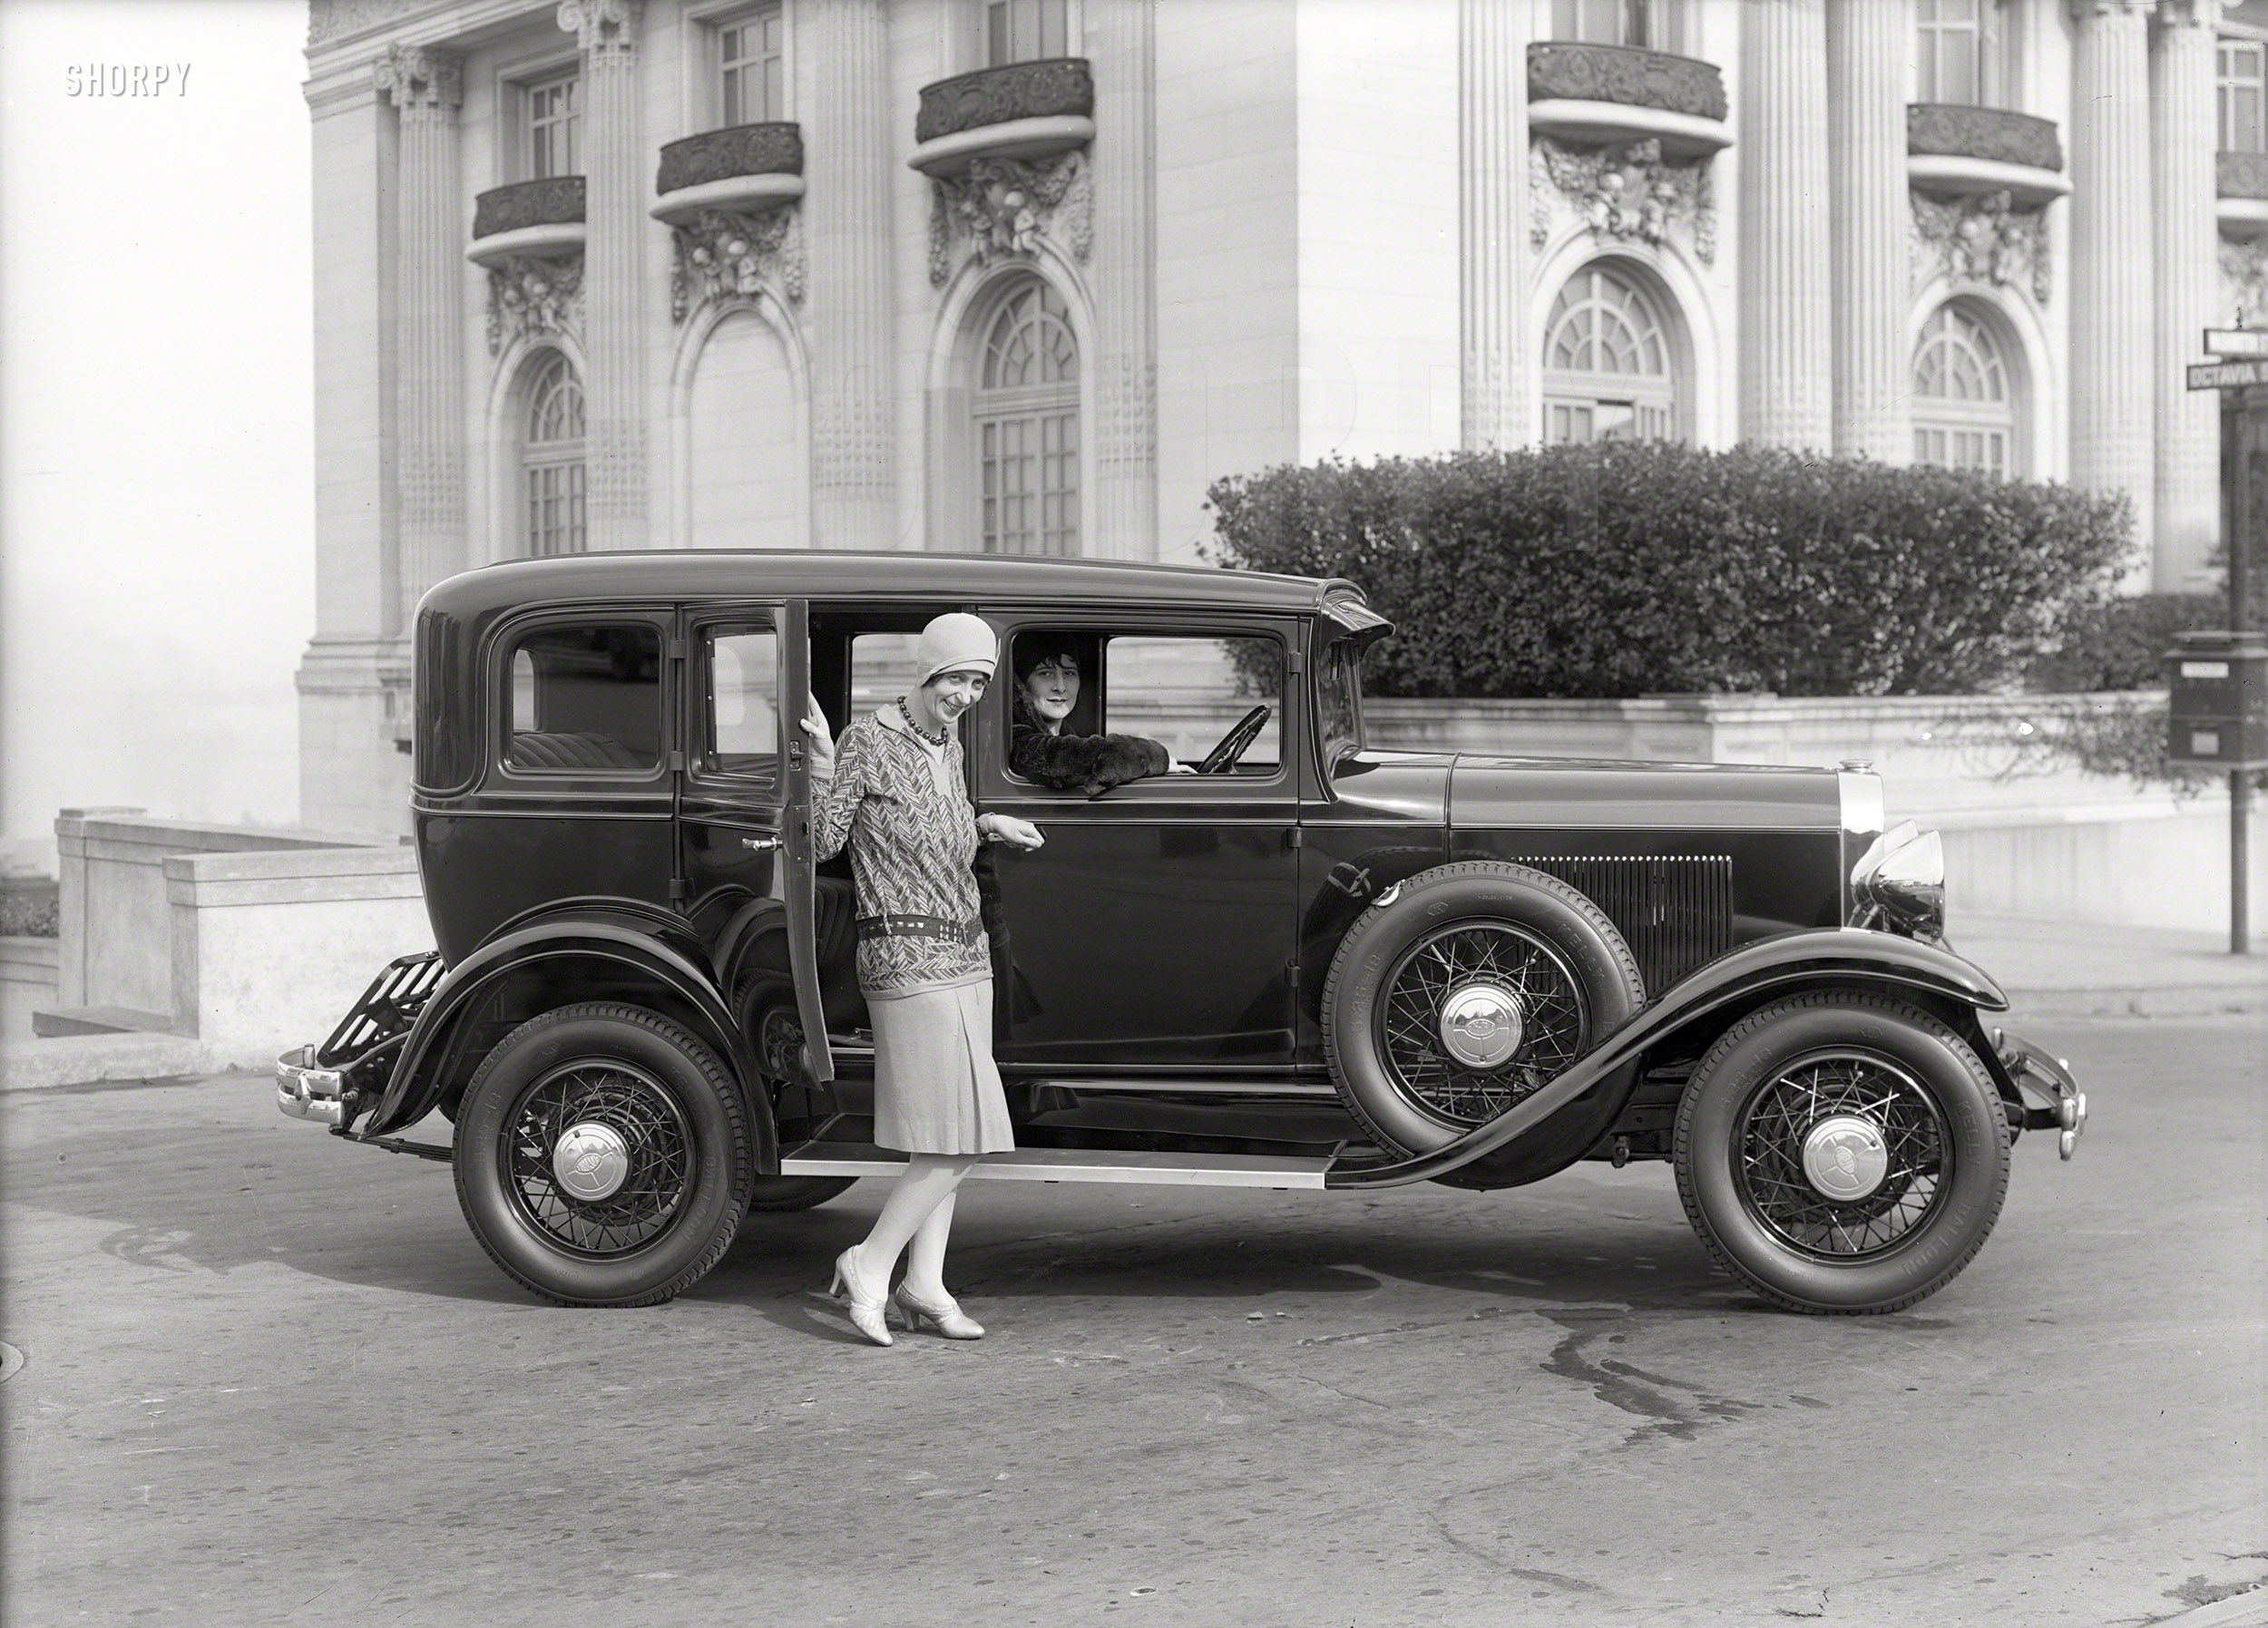 San Francisco circa 1930. "Oldsmobile sedan at Spreckels Mansion." With Olive Oyl and her sister, Baby. 5x7 glass negative by Christopher Helin. View full size.